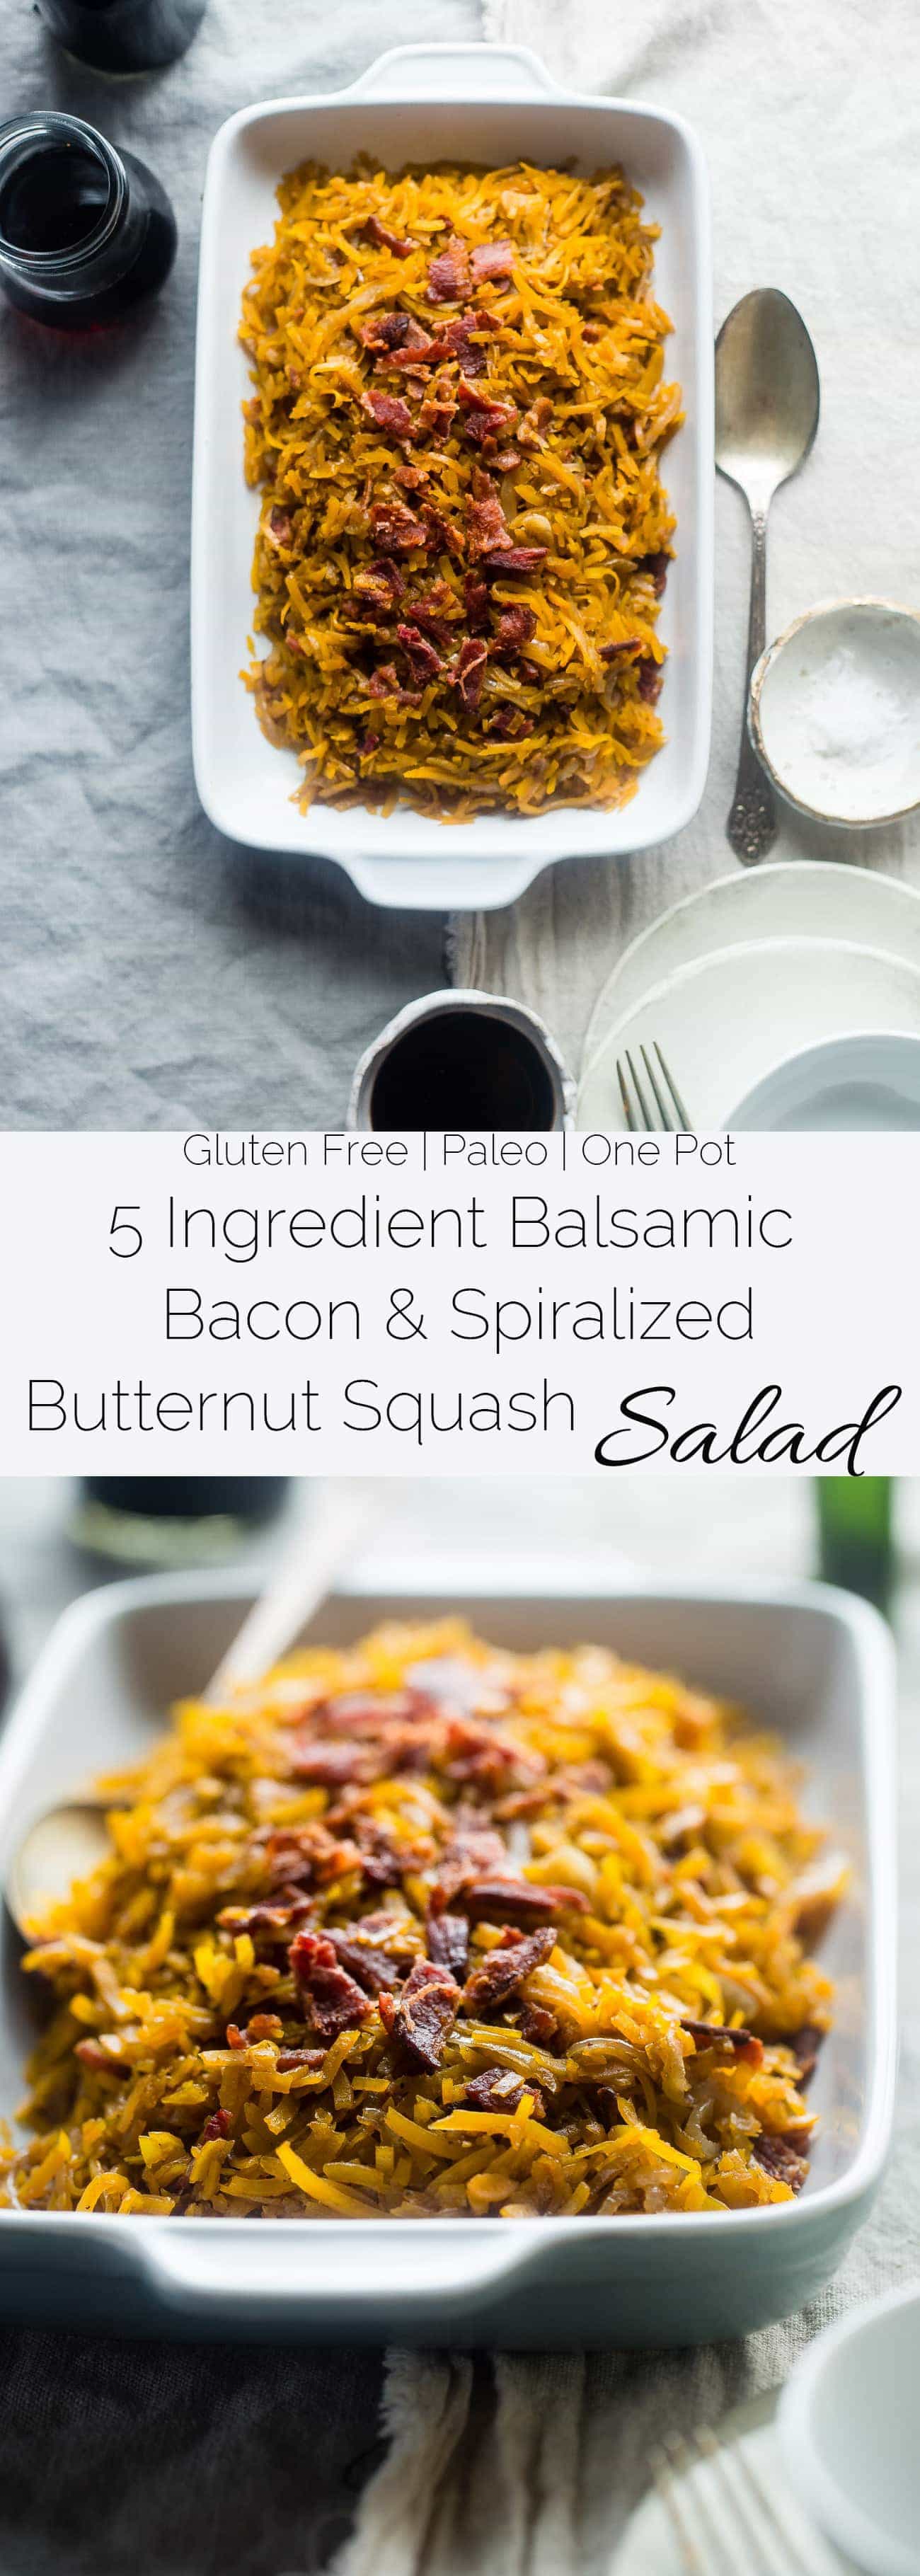 5 Ingredient Bacon Balsamic Butternut Squash Salad - This spiralized butternut squash salad features crispy bacon and a sweet and tangy maple glaze! It's a healthy, paleo friendly side dish with only 5 ingredients! | Foodfaithfitness.com | @FoodFaithFit